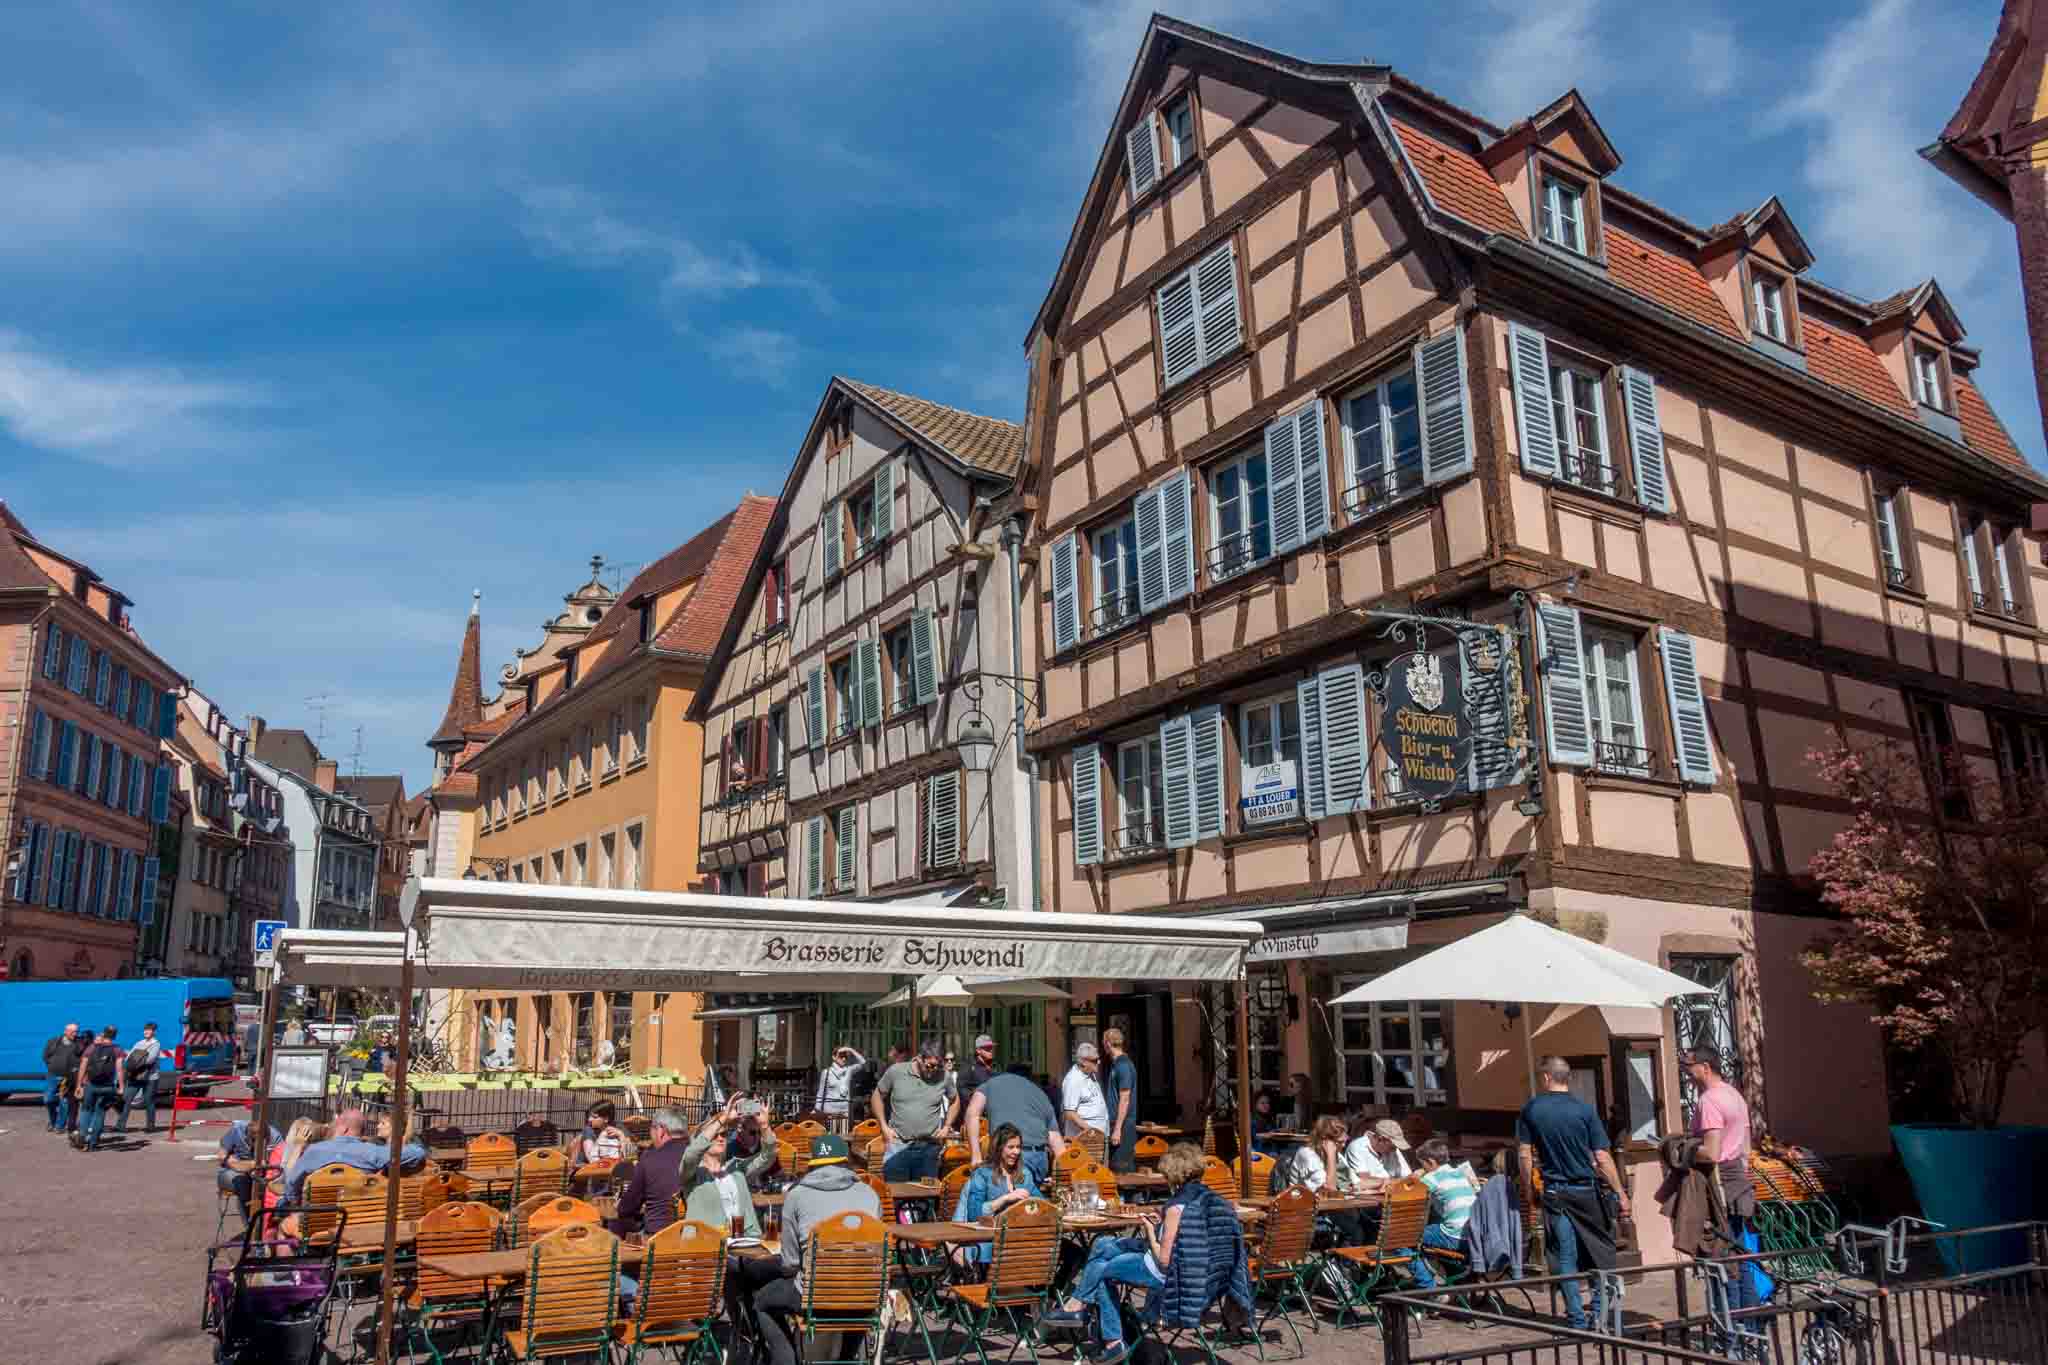 People eating at an outdoor cafe in a town square